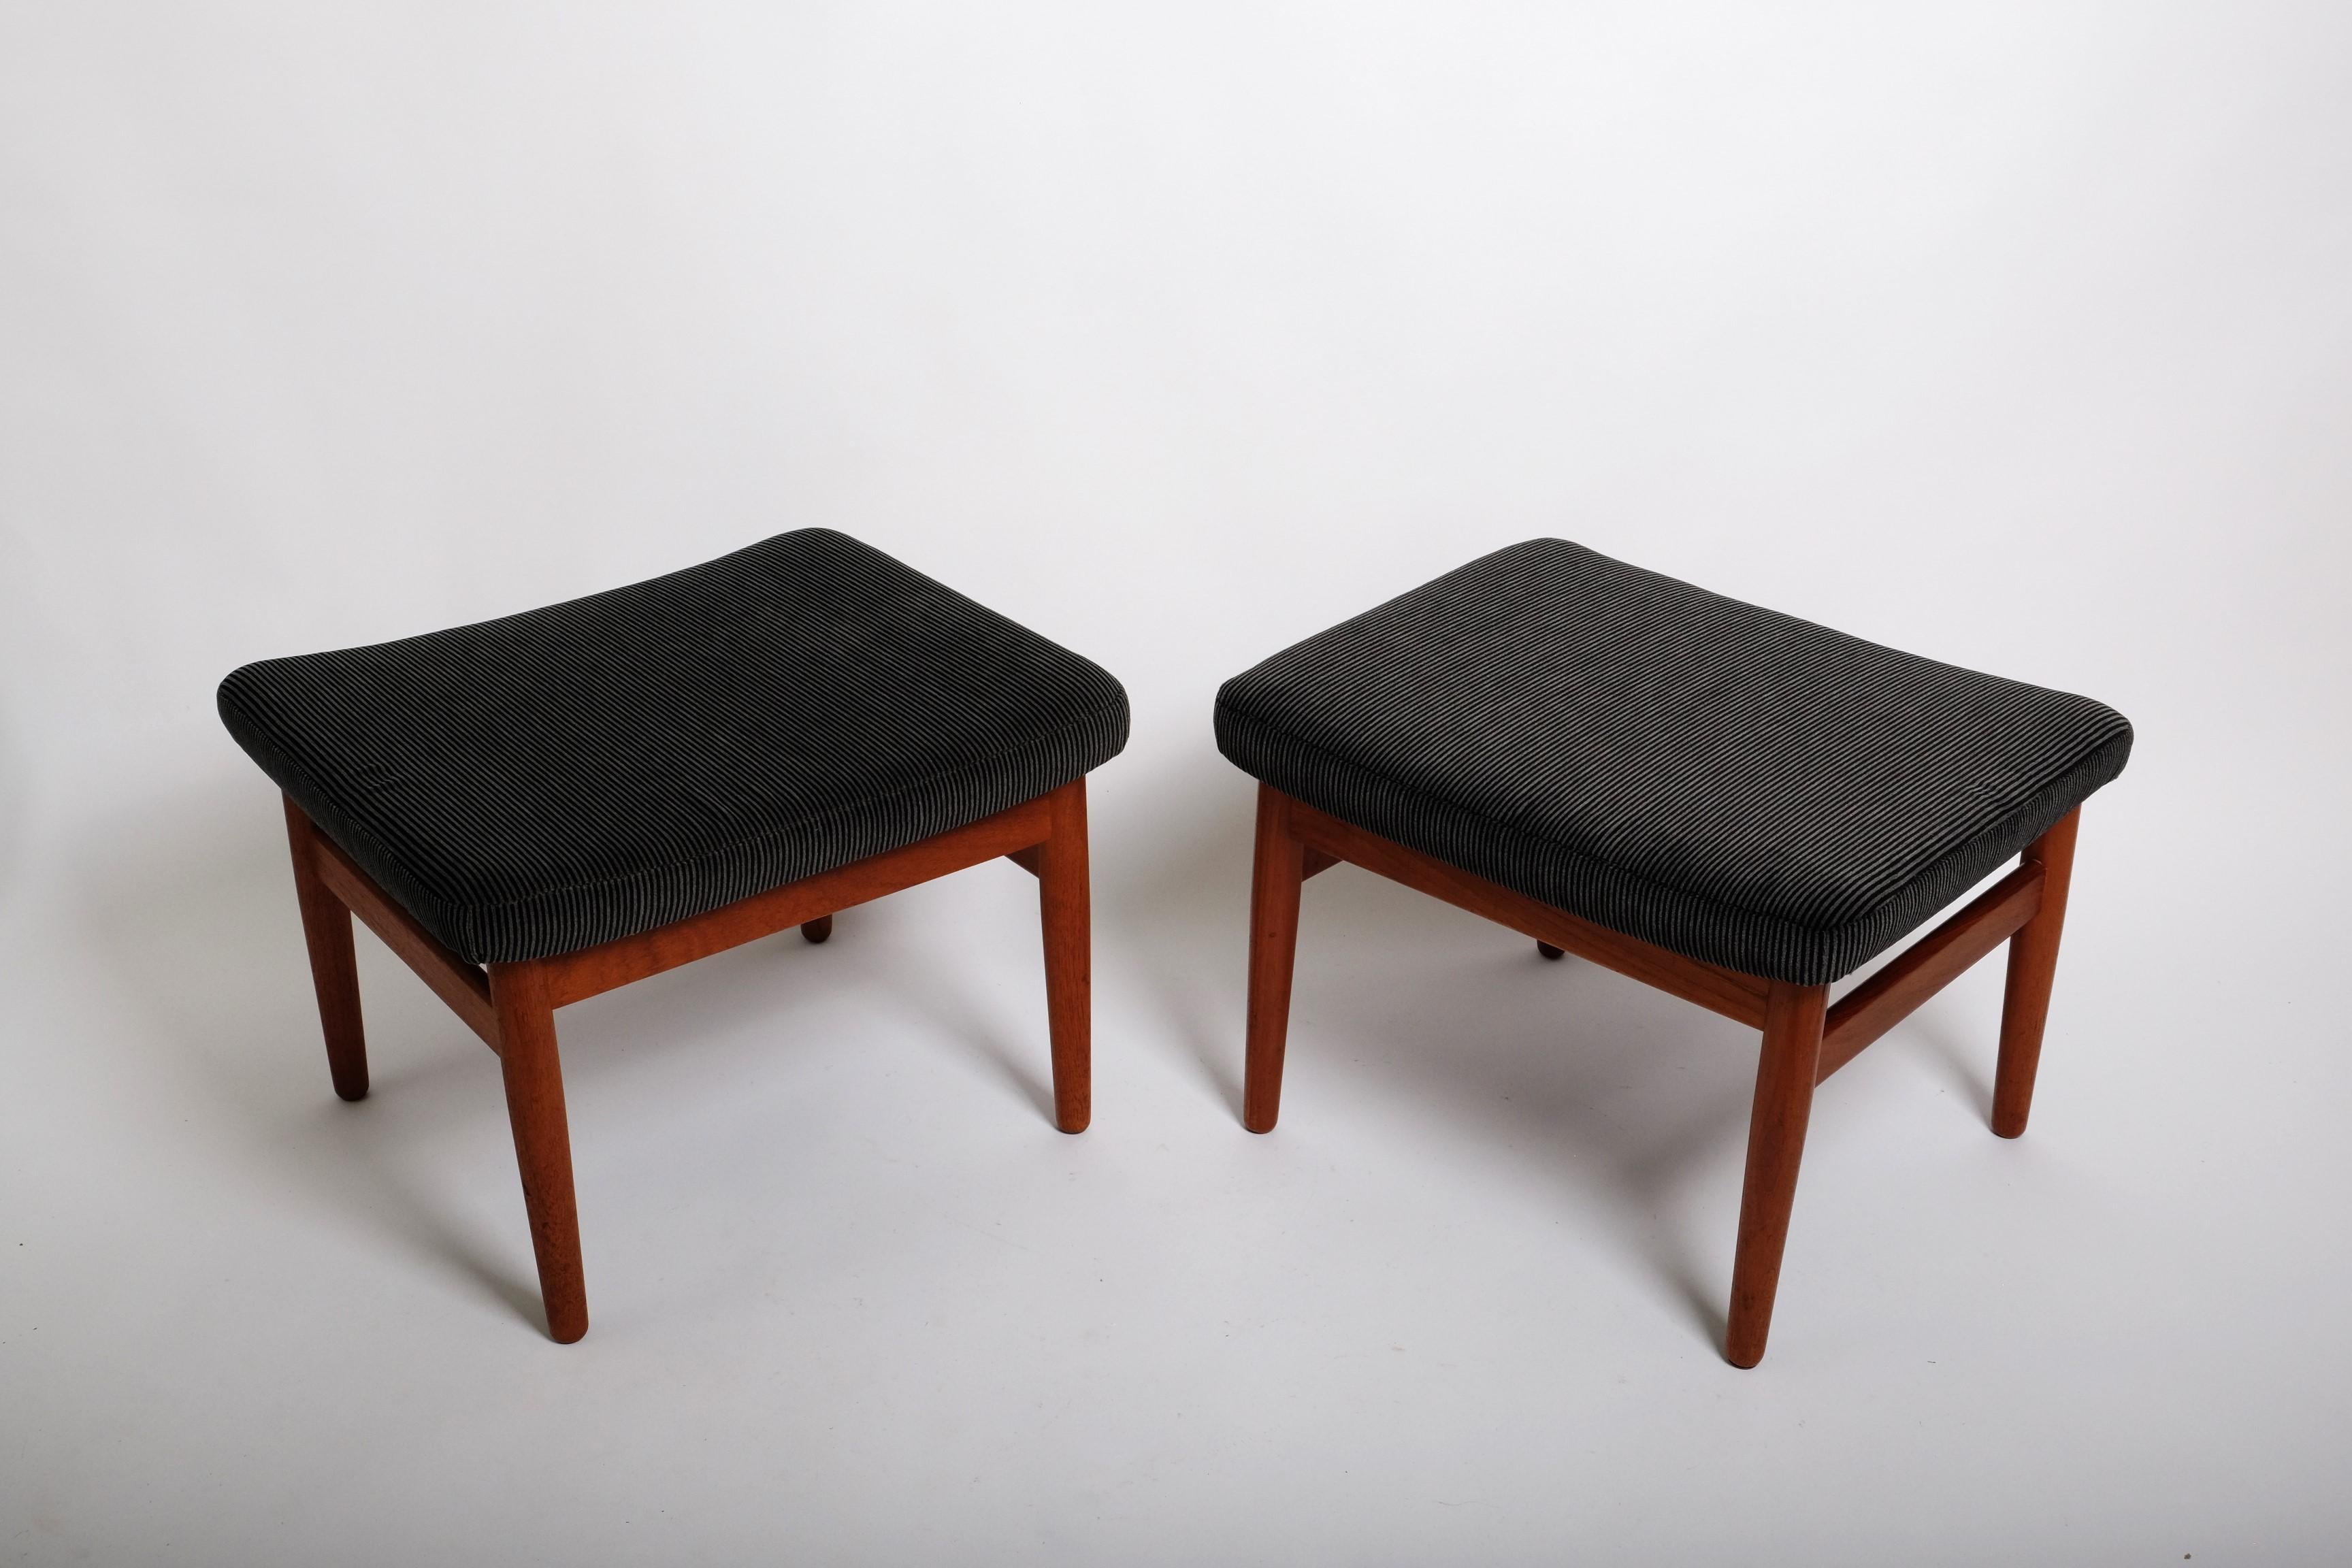 Two Mid-Century Stools by Arne Vodder FD164 Ottomans France & Son, Denmark 1960s For Sale 2